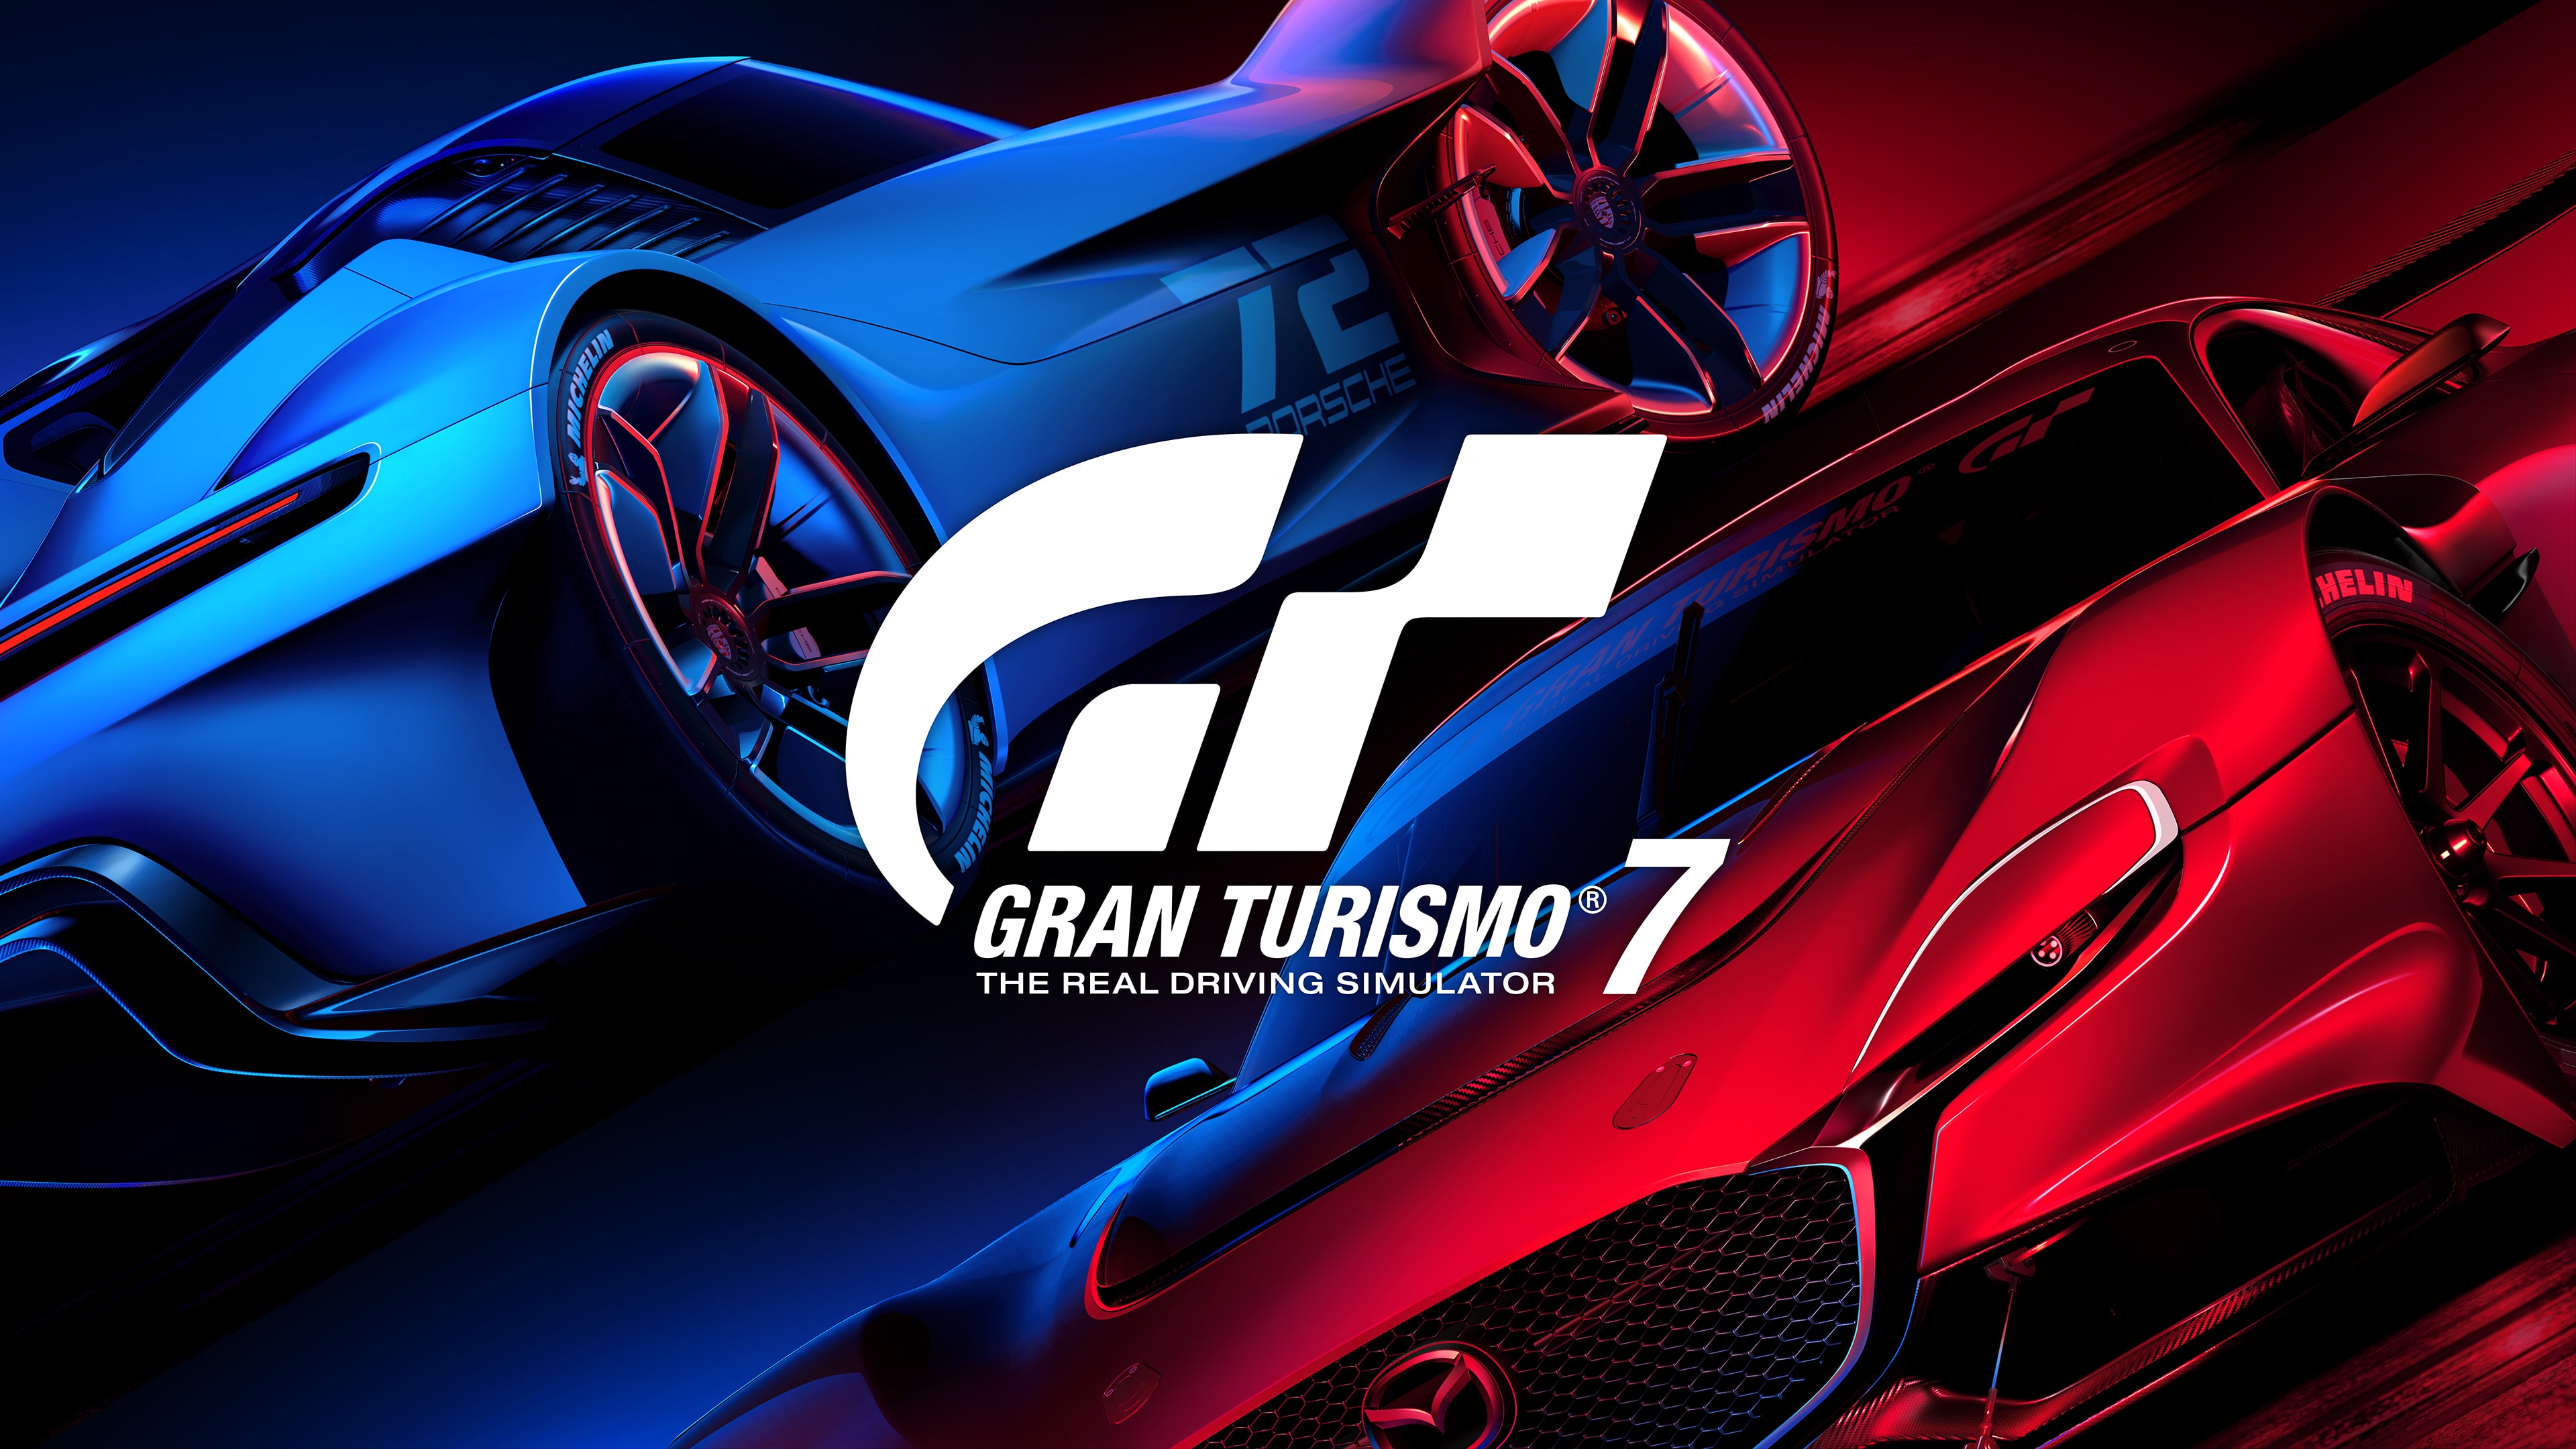 kunst pude Fern Gran Turismo 7 - Exclusive PS5 & PS4 Games | PlayStation